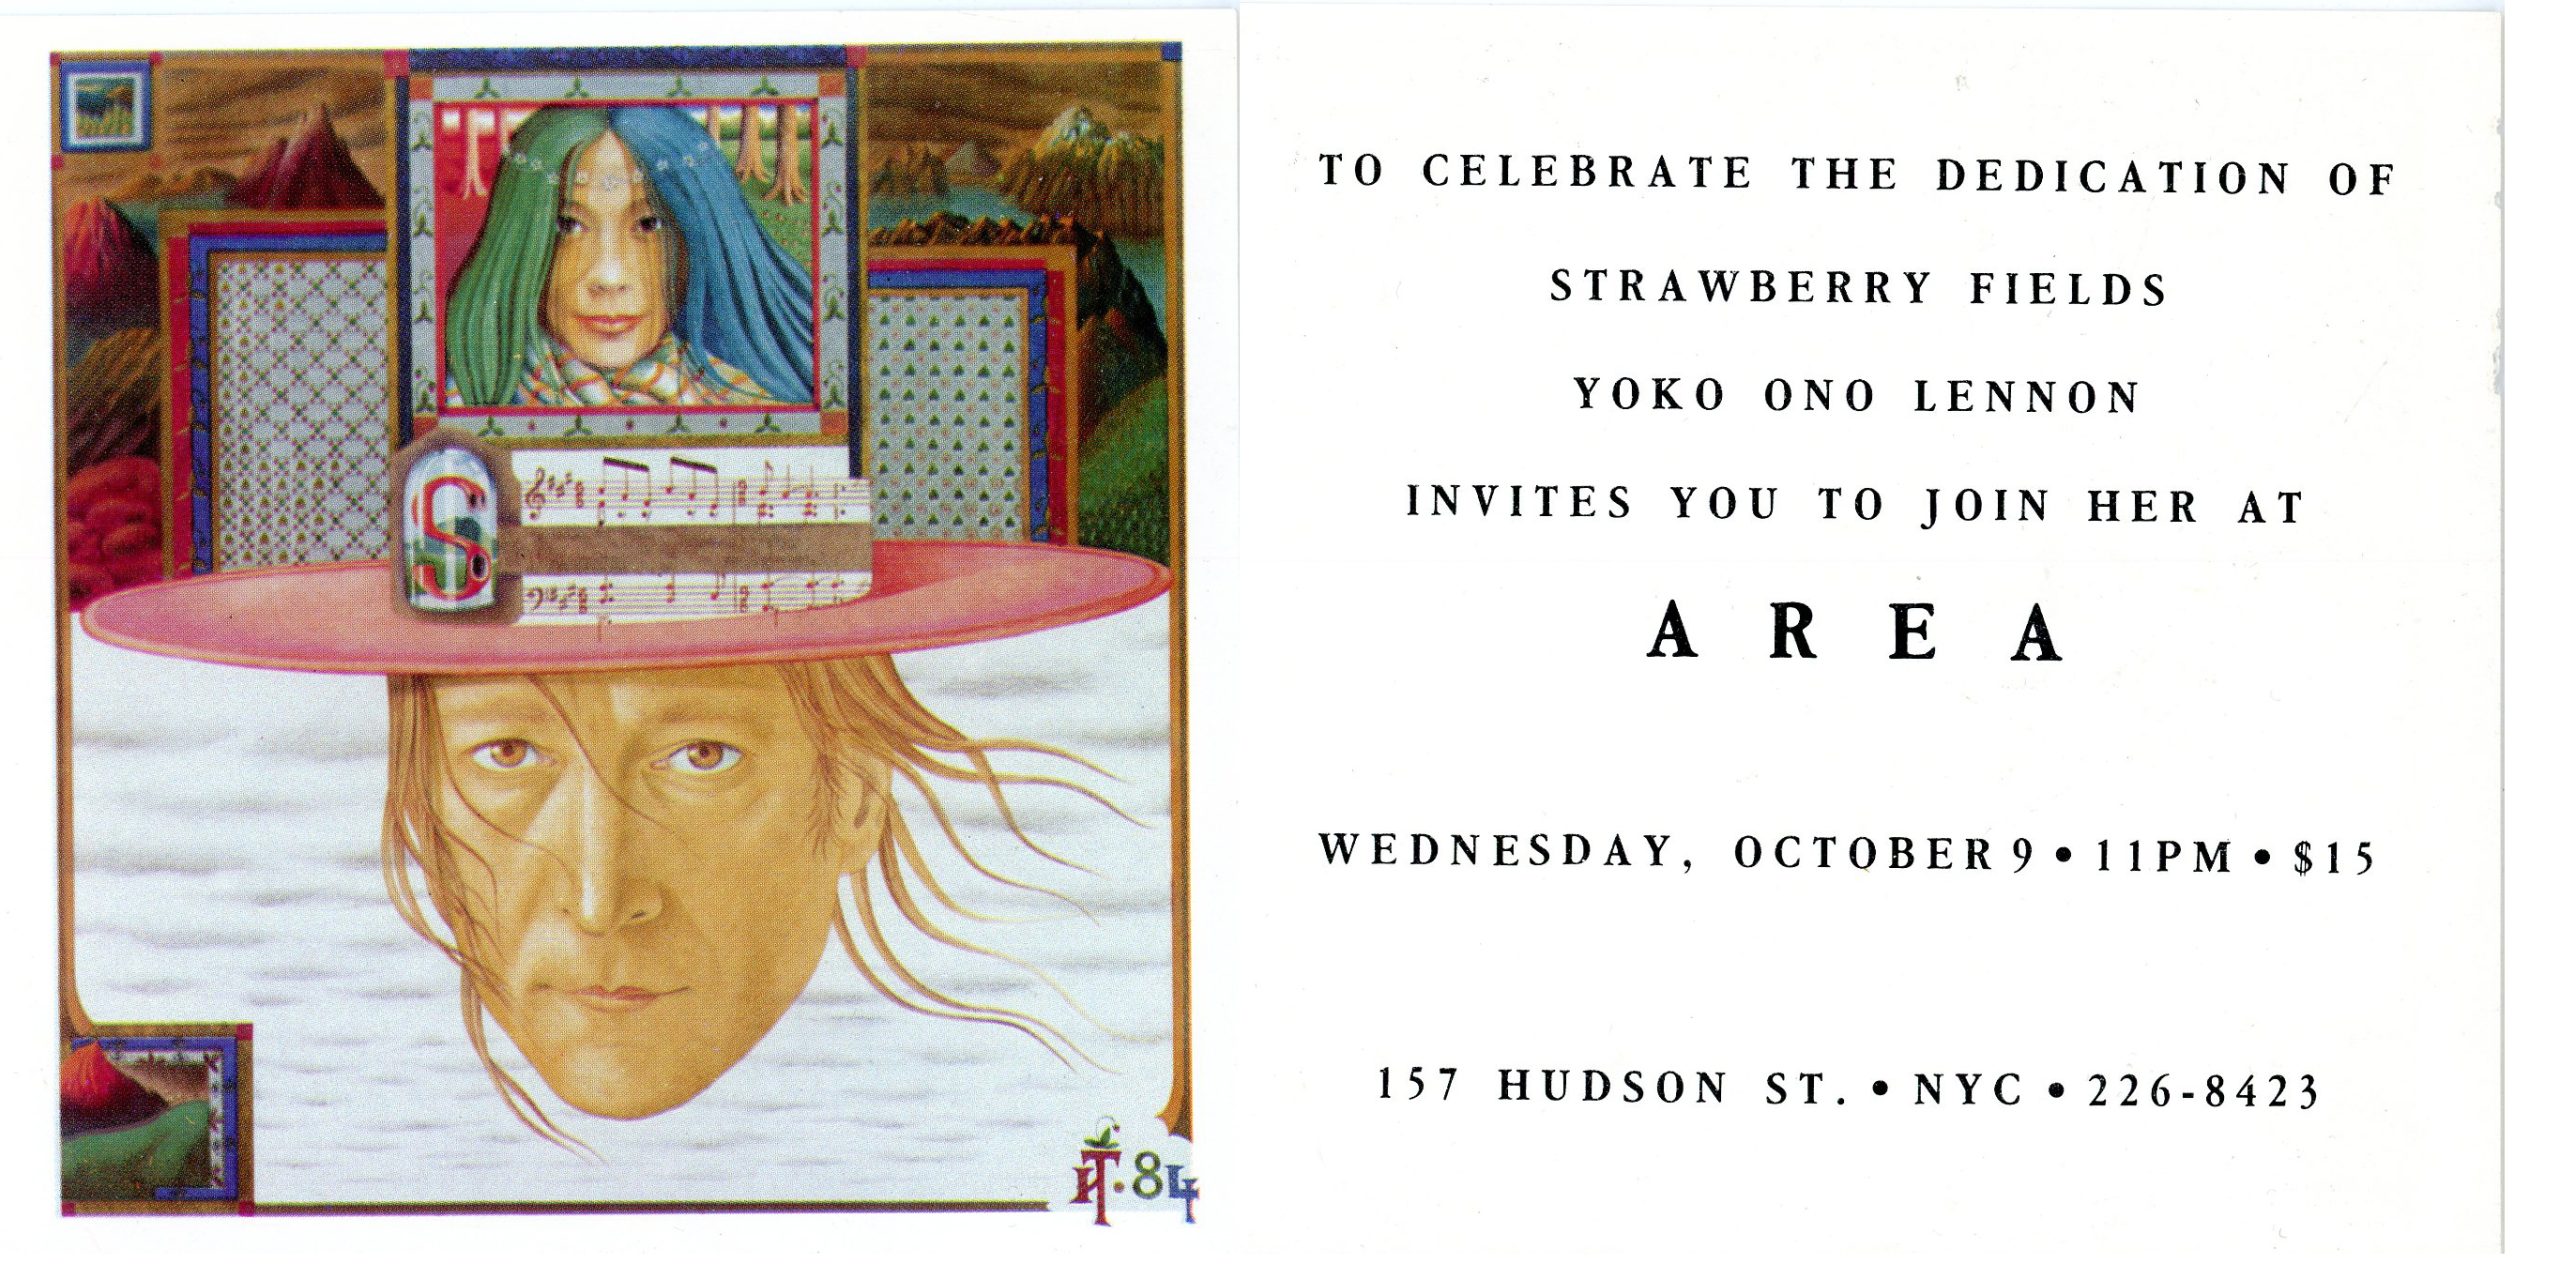 AREA Nightclub, “Yoko Ono Lennon Invites You to Join Her at Area to Celebrate the Dedication of Strawberry Fields,” Card, October 9, 1985